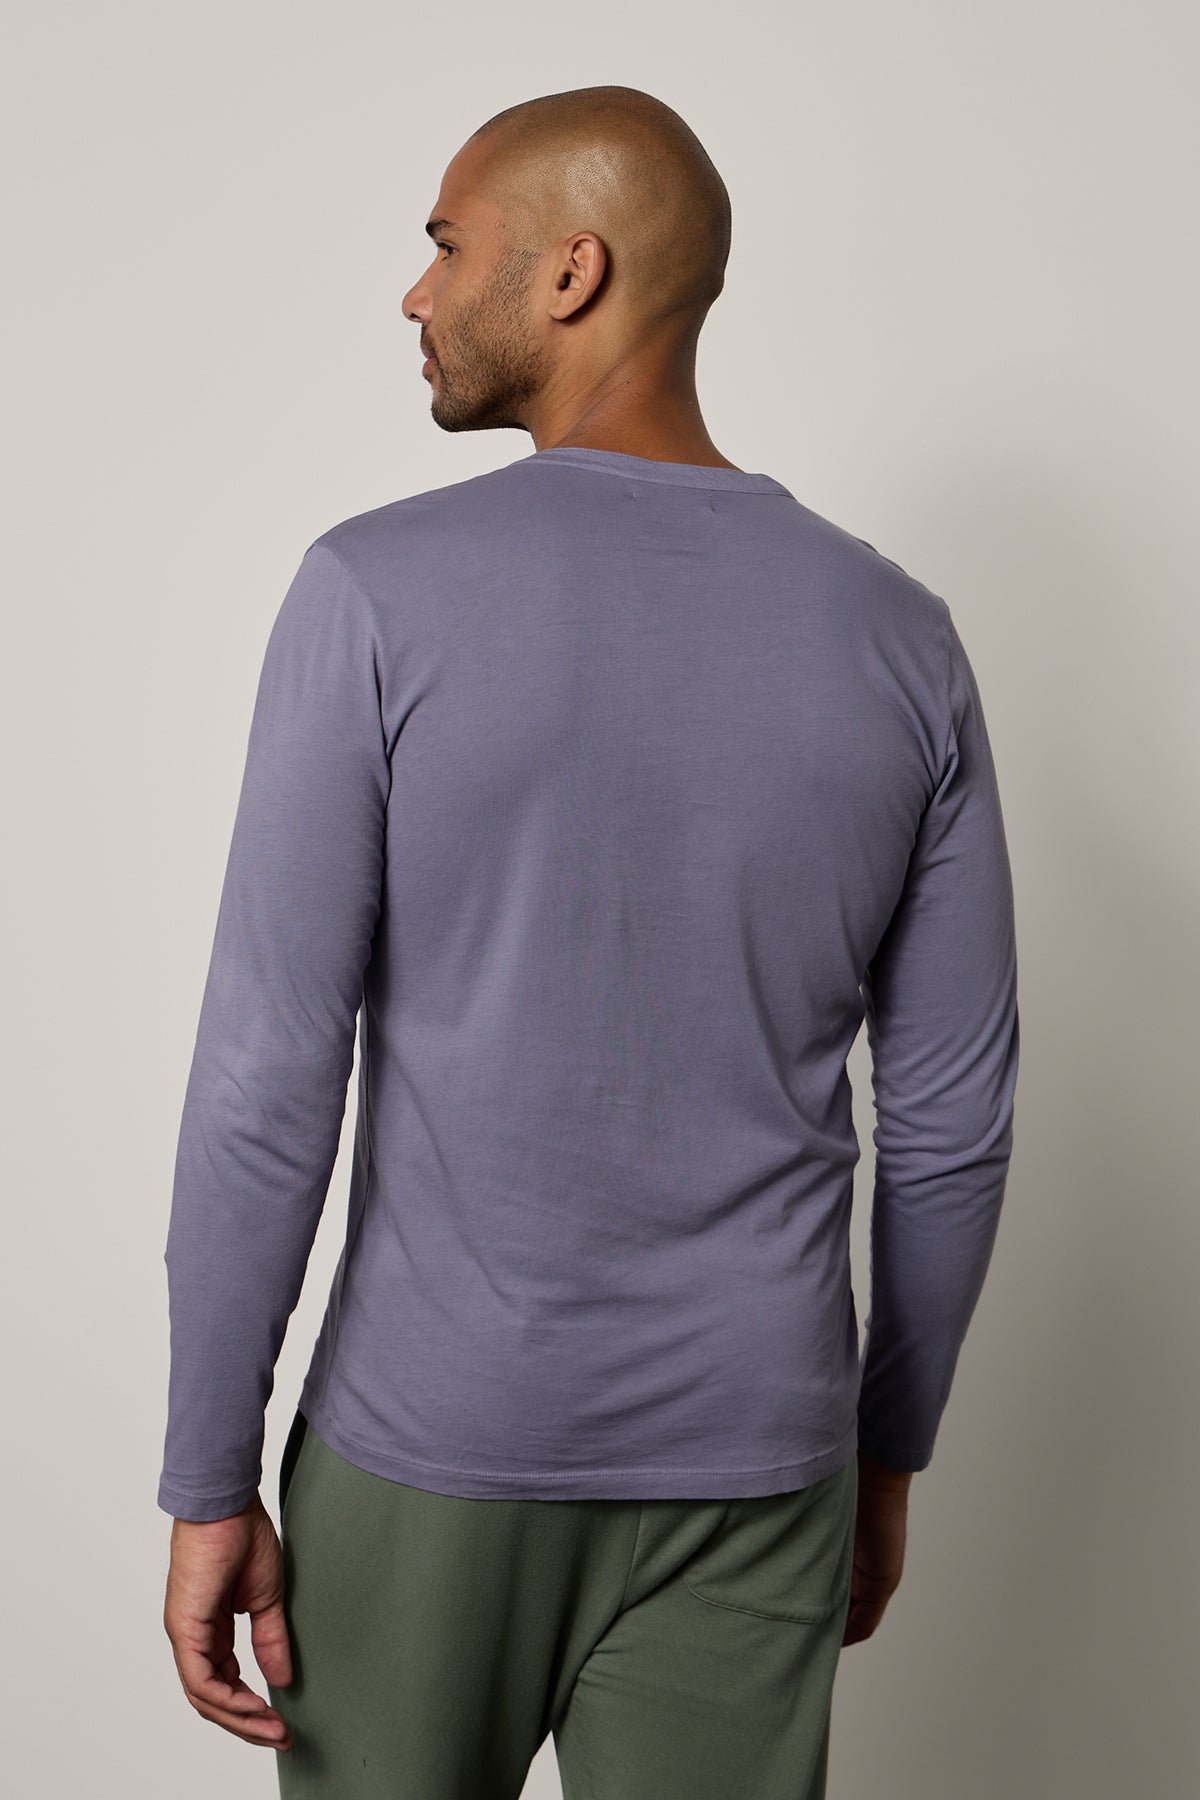   The back view of a man wearing an ALVARO COTTON JERSEY HENLEY t - shirt by Velvet by Graham & Spencer. 